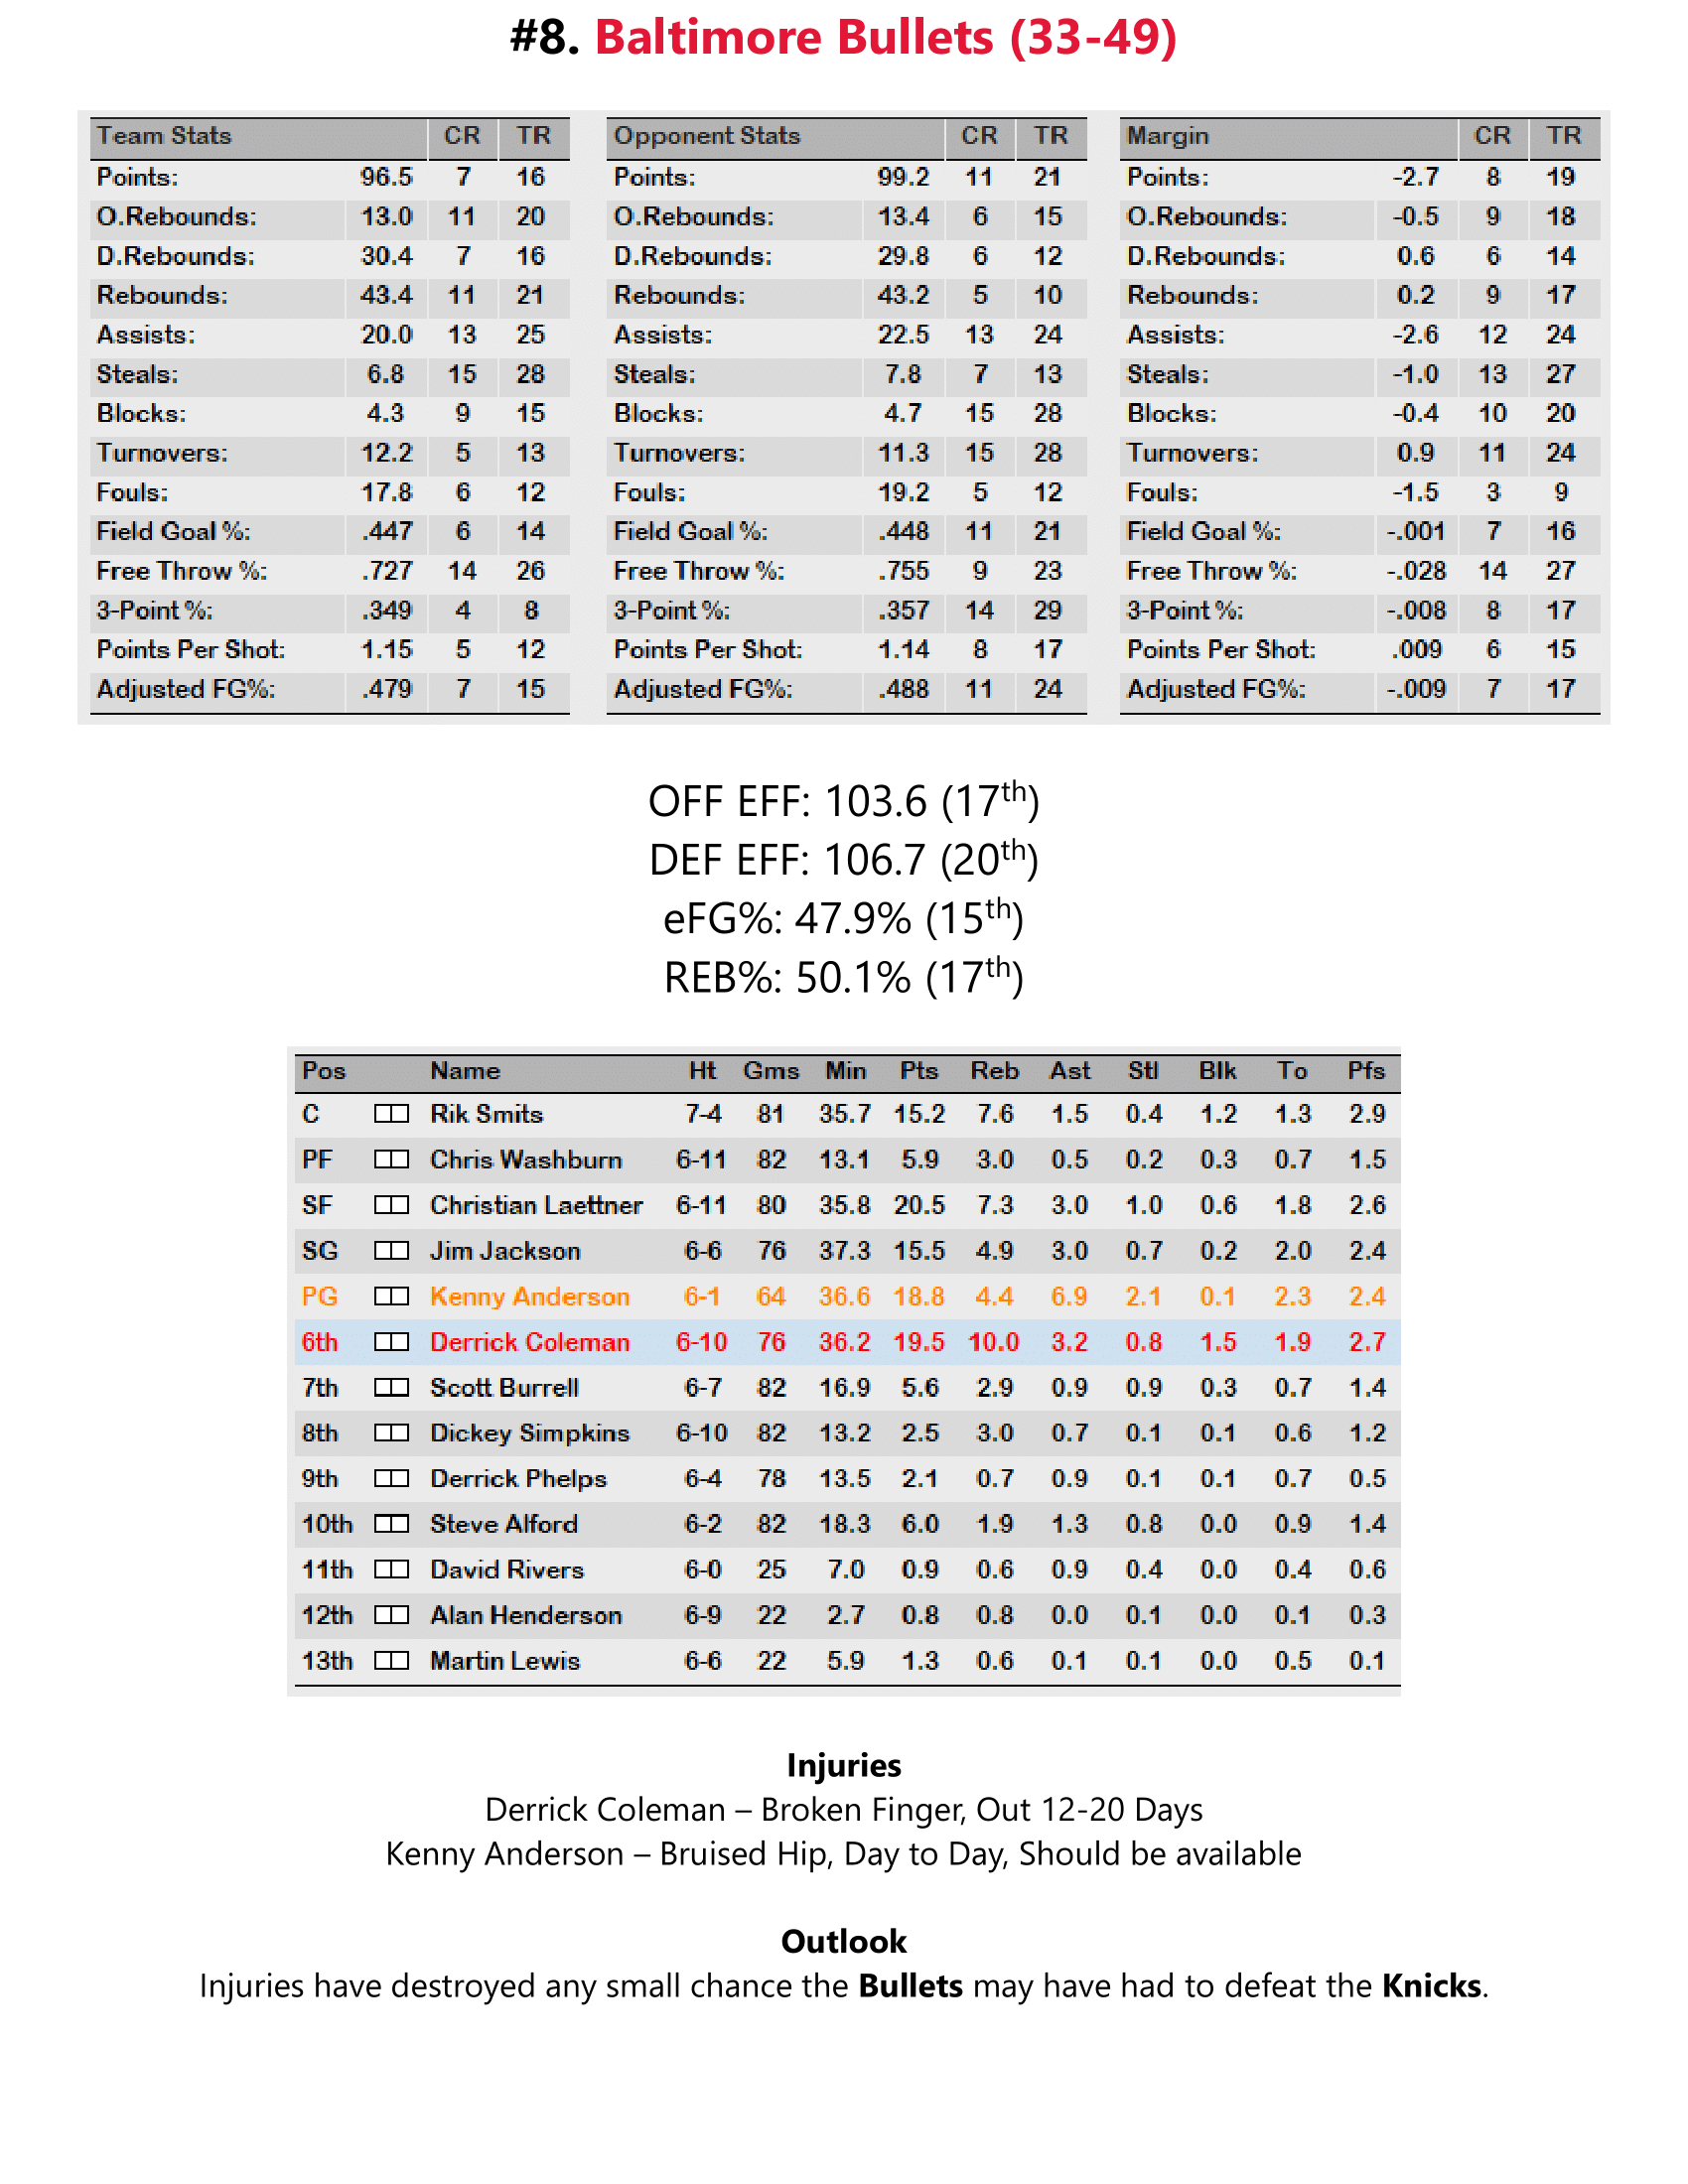 95-96-Part-3-Playoff-Preview-17.png